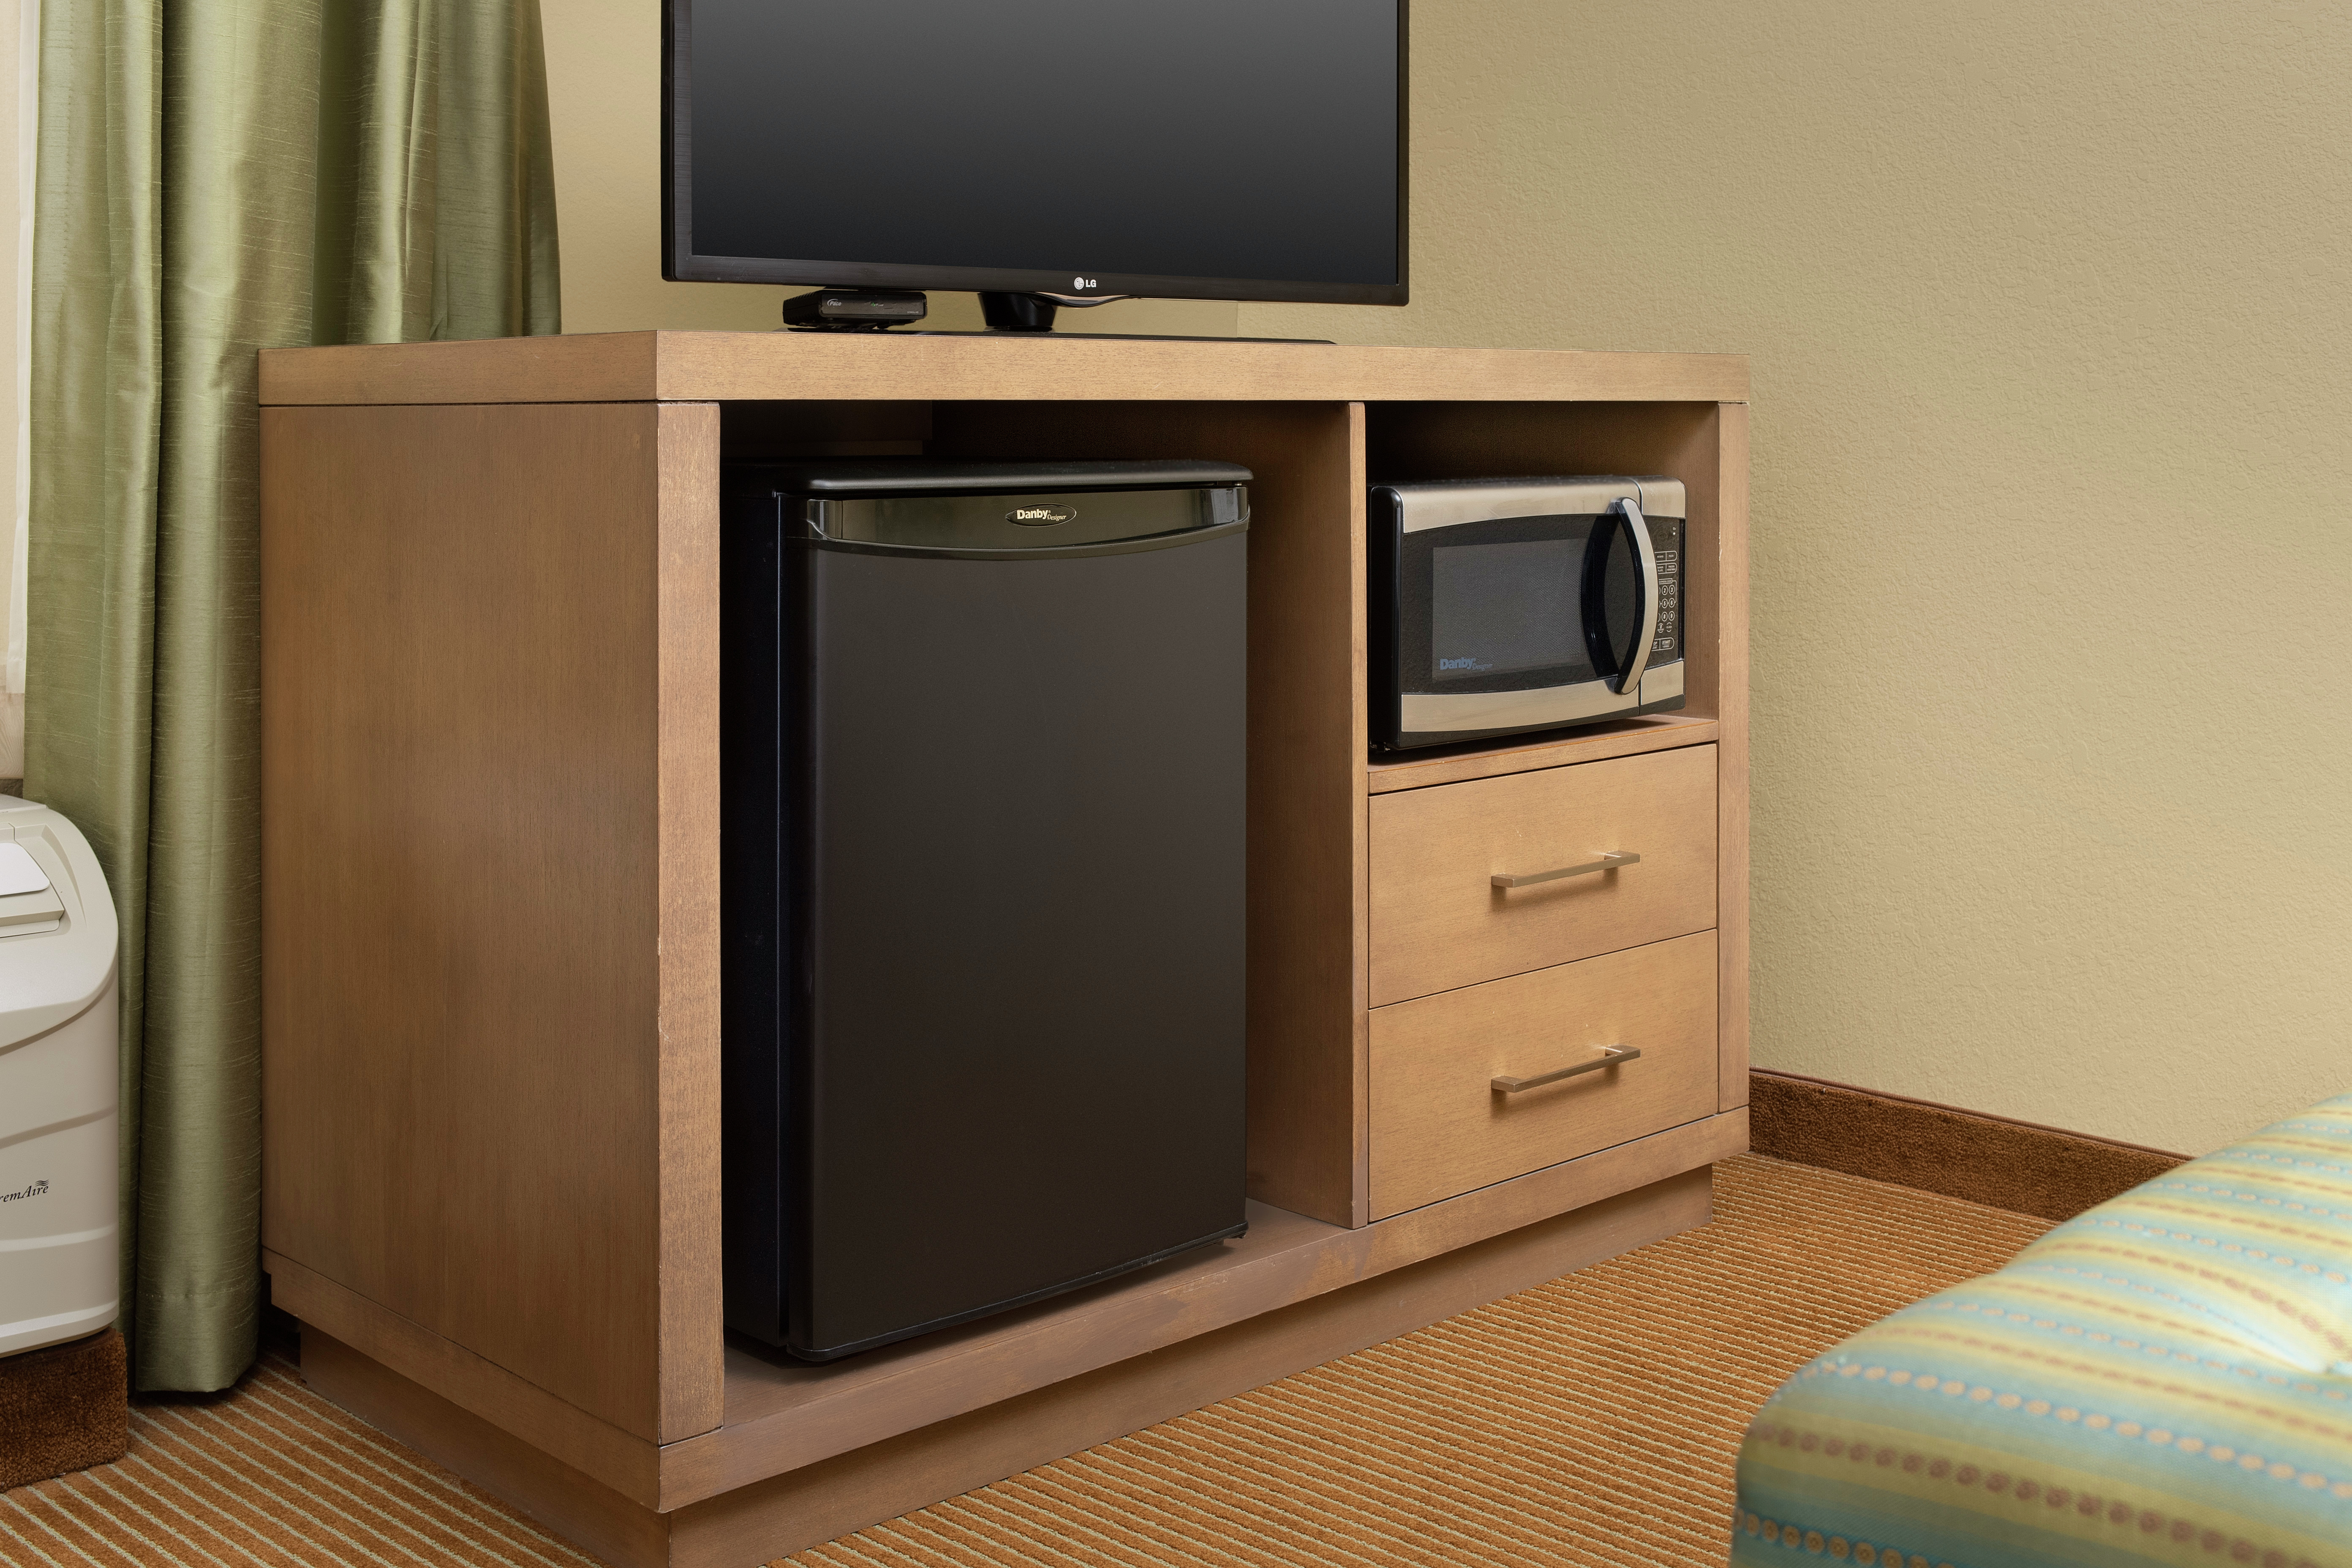 Guest Room Amenities with Mini-fridge and Microwave 